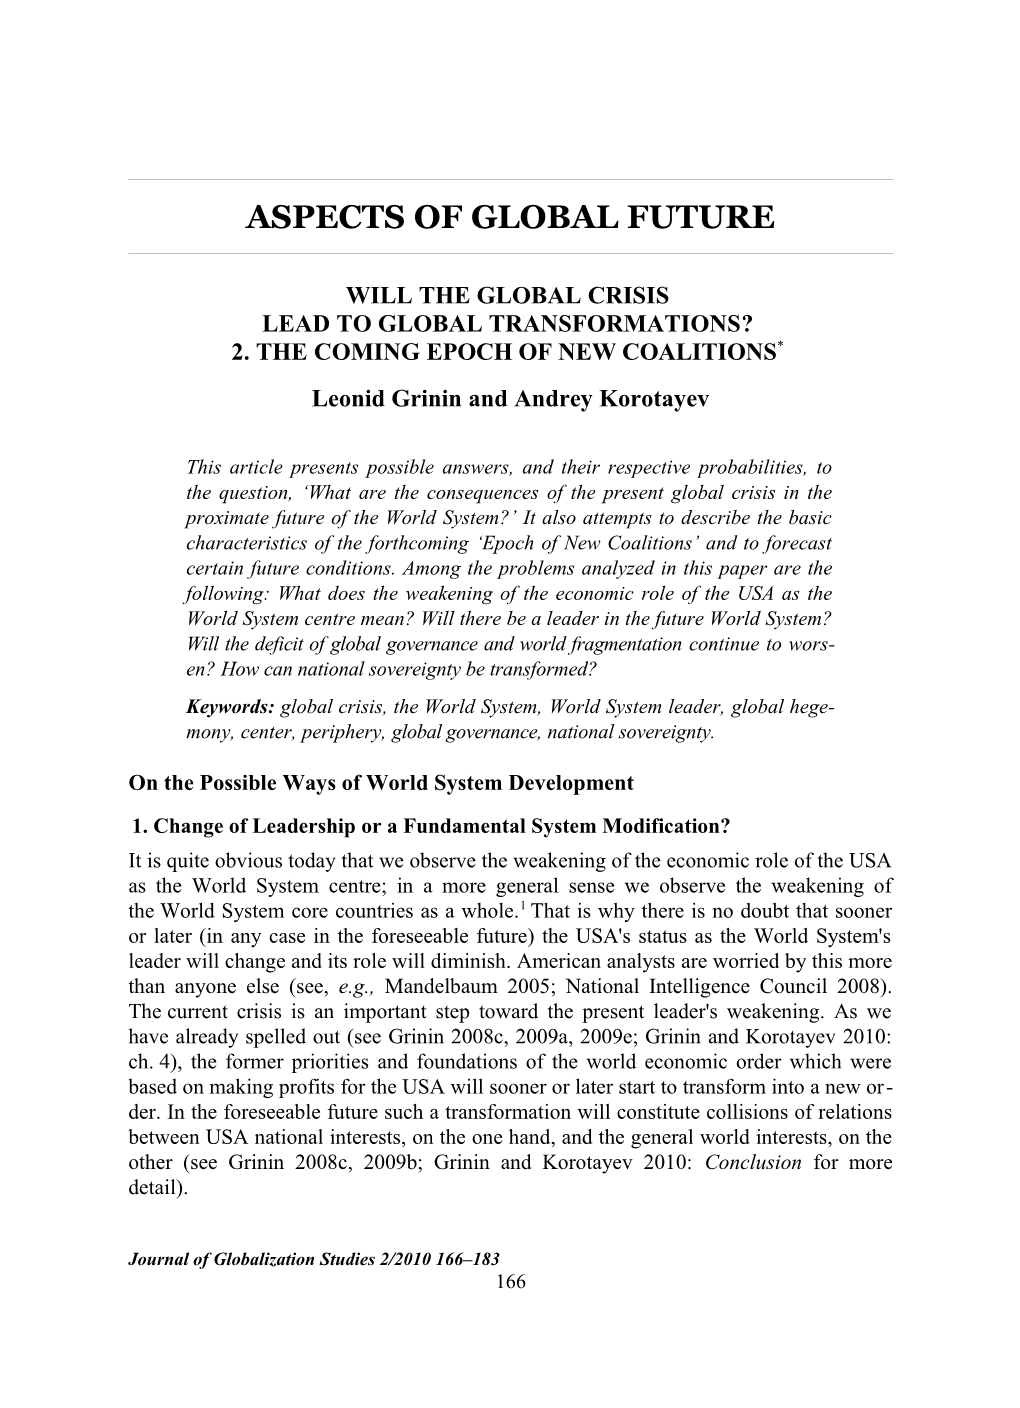 Grinin and Korotayev Will the Global Crisis Lead to Global Transformations?